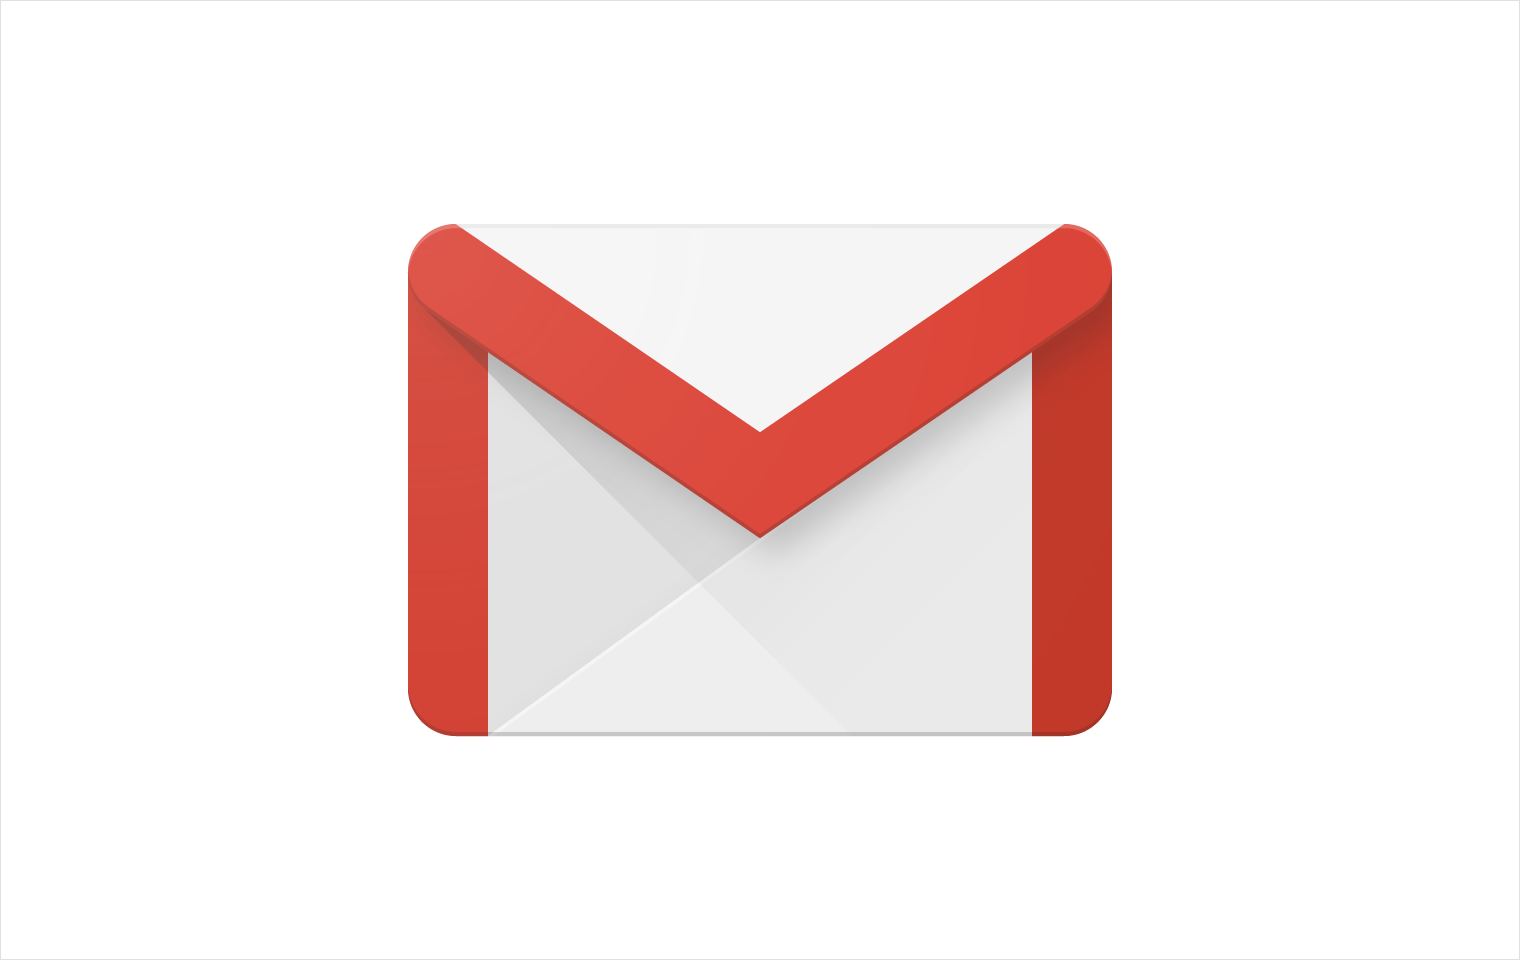 This is the new Gmail design